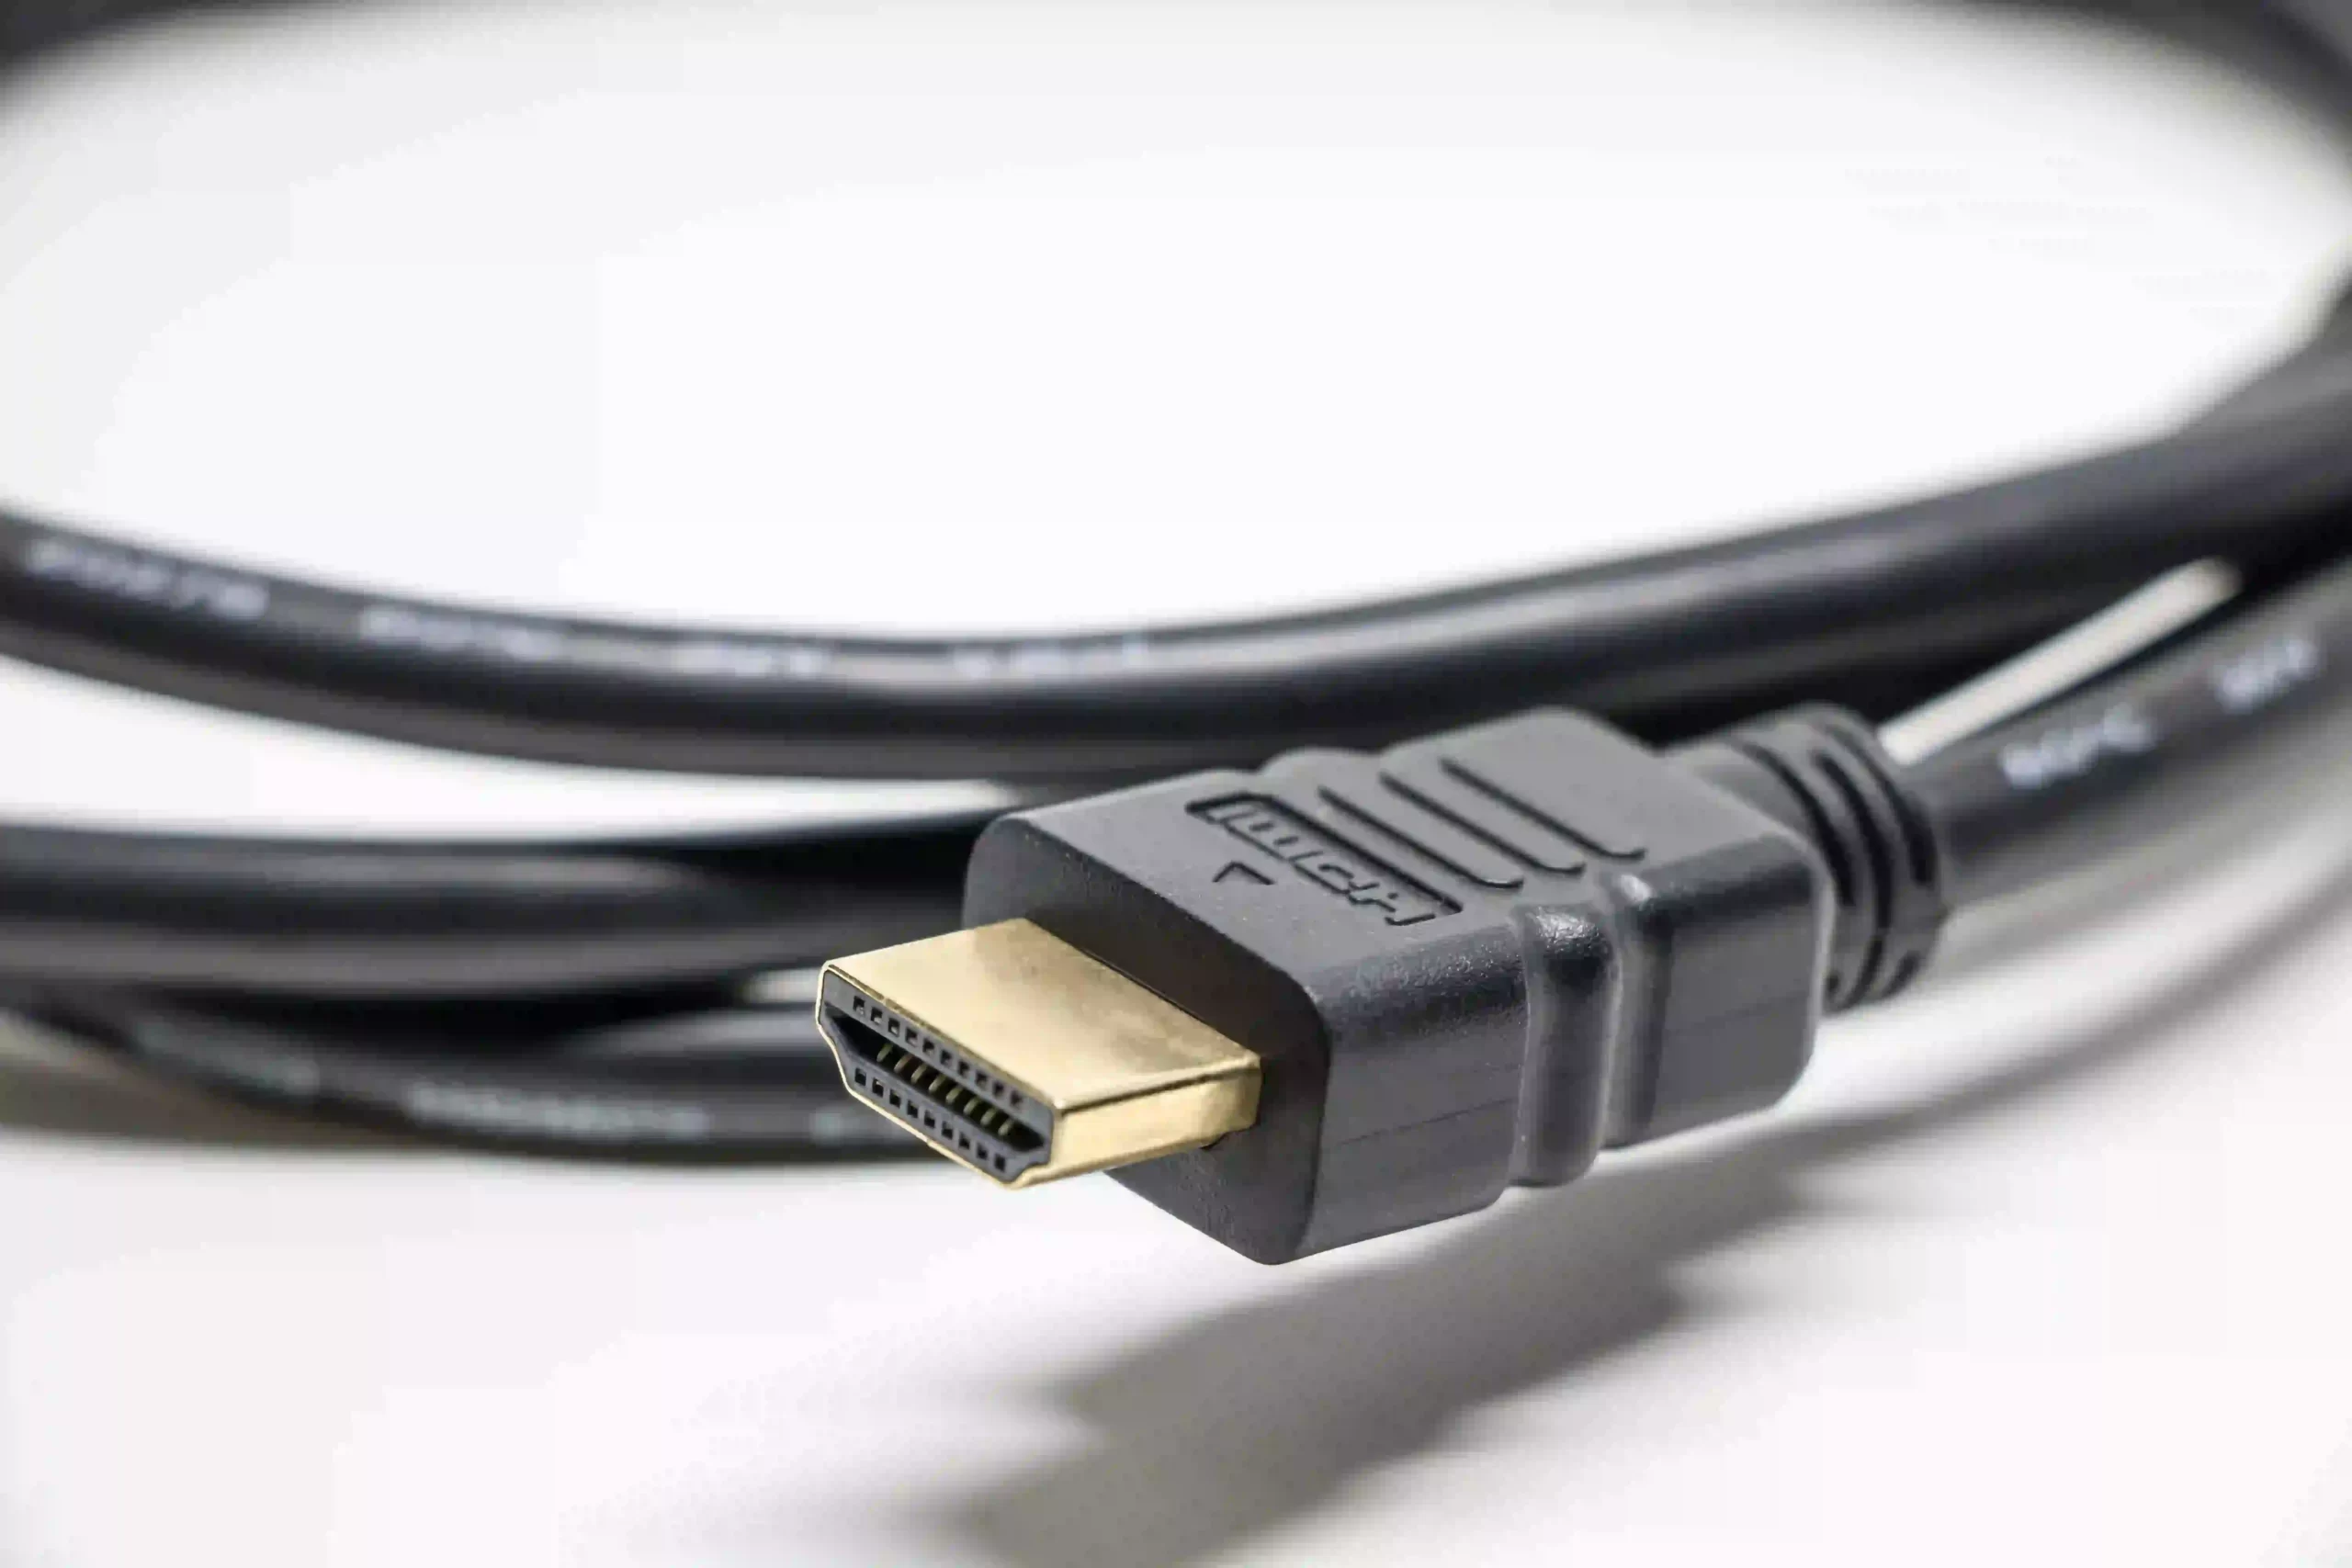 "HDMI Cable" of Xbox Series X